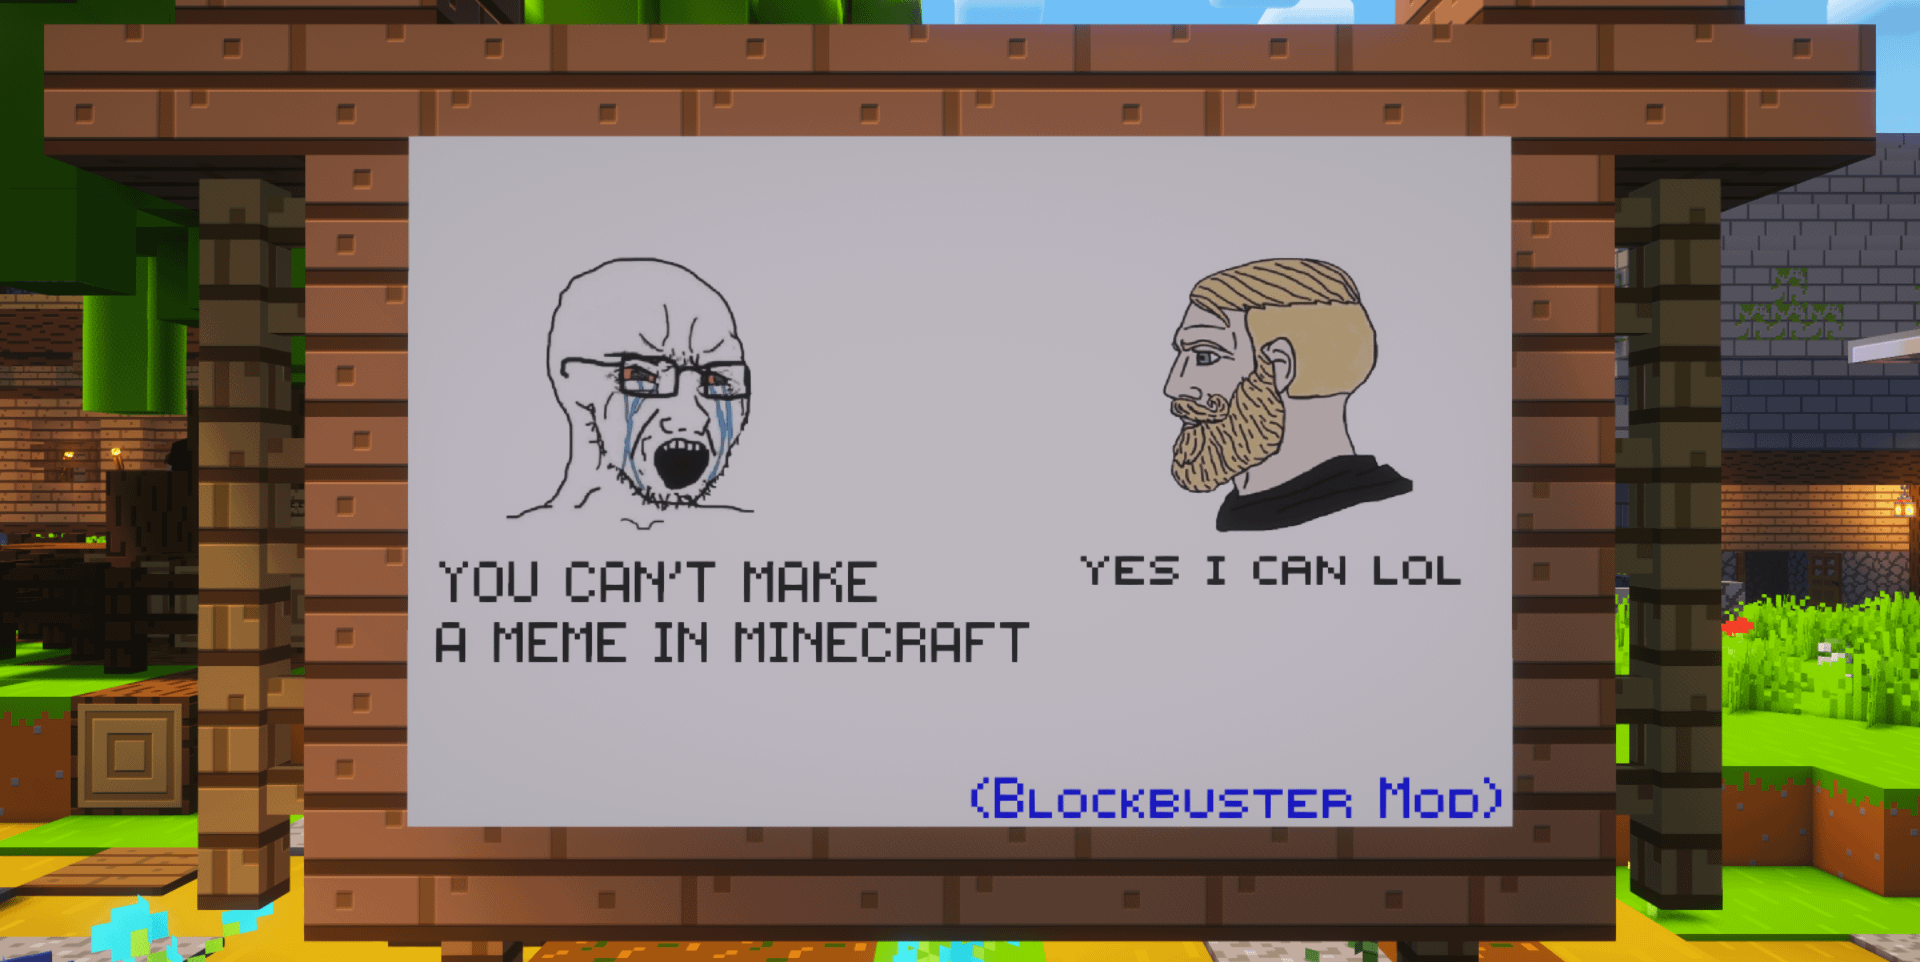 Minecraft Memes - Yes, we can. (SPICY-Mattiou)